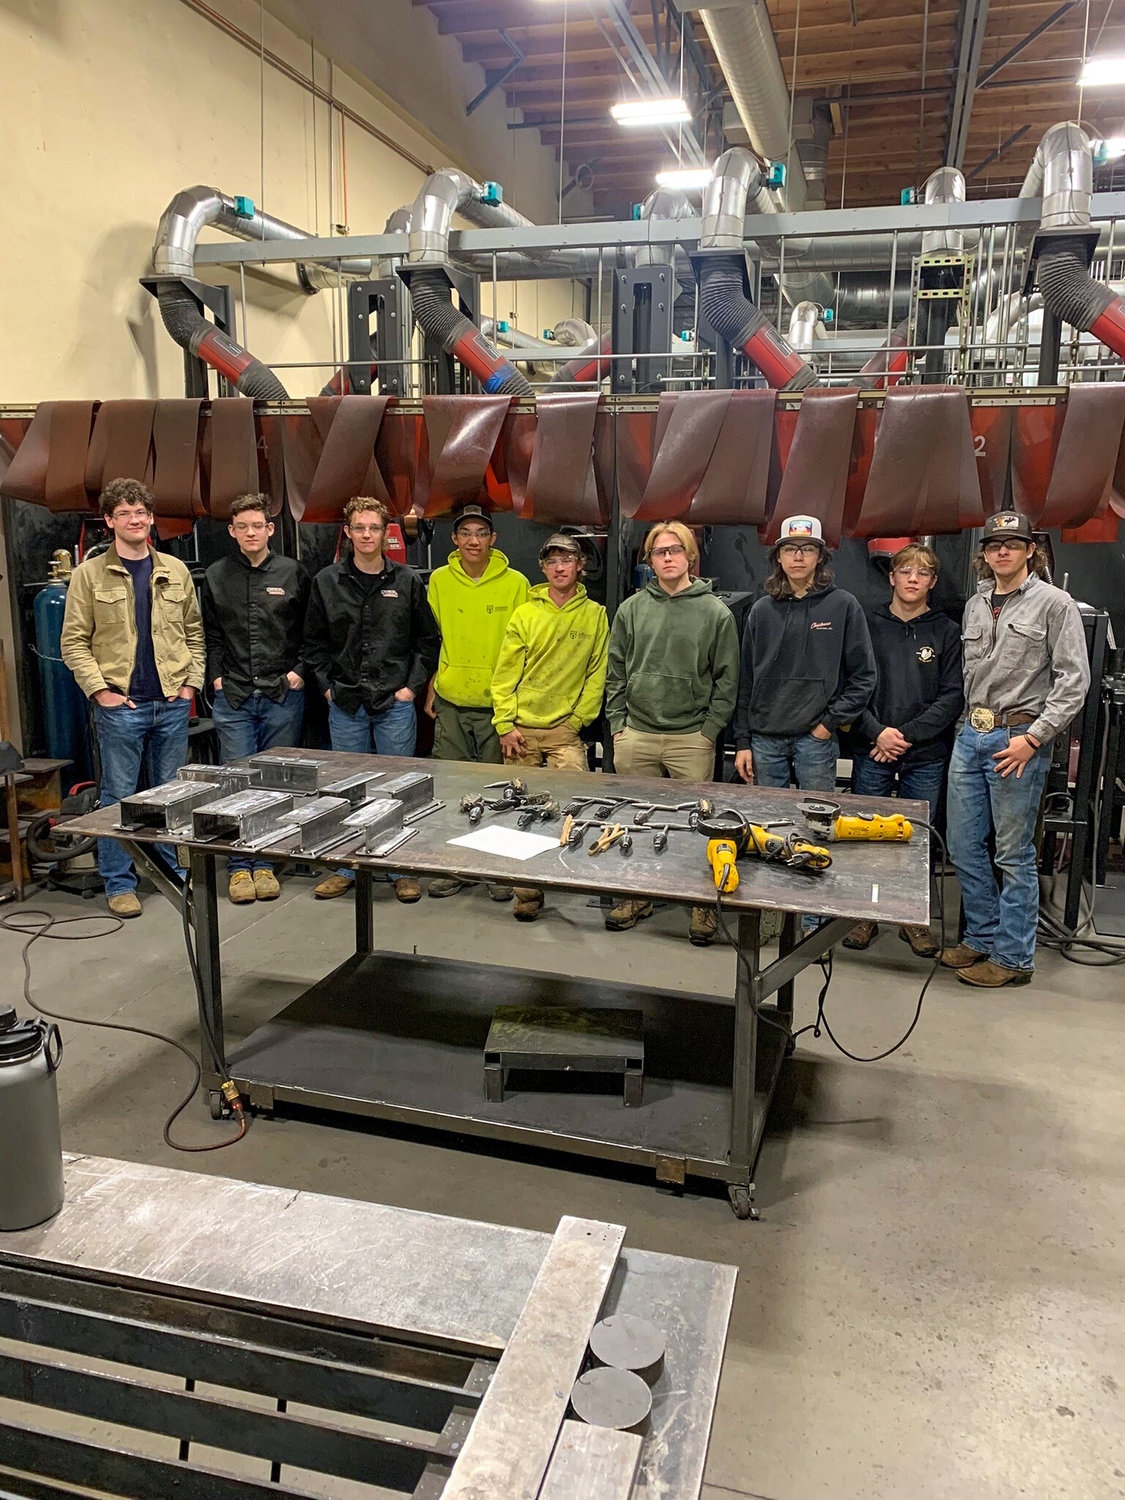 The Battle Ground High School welding class is pictured.